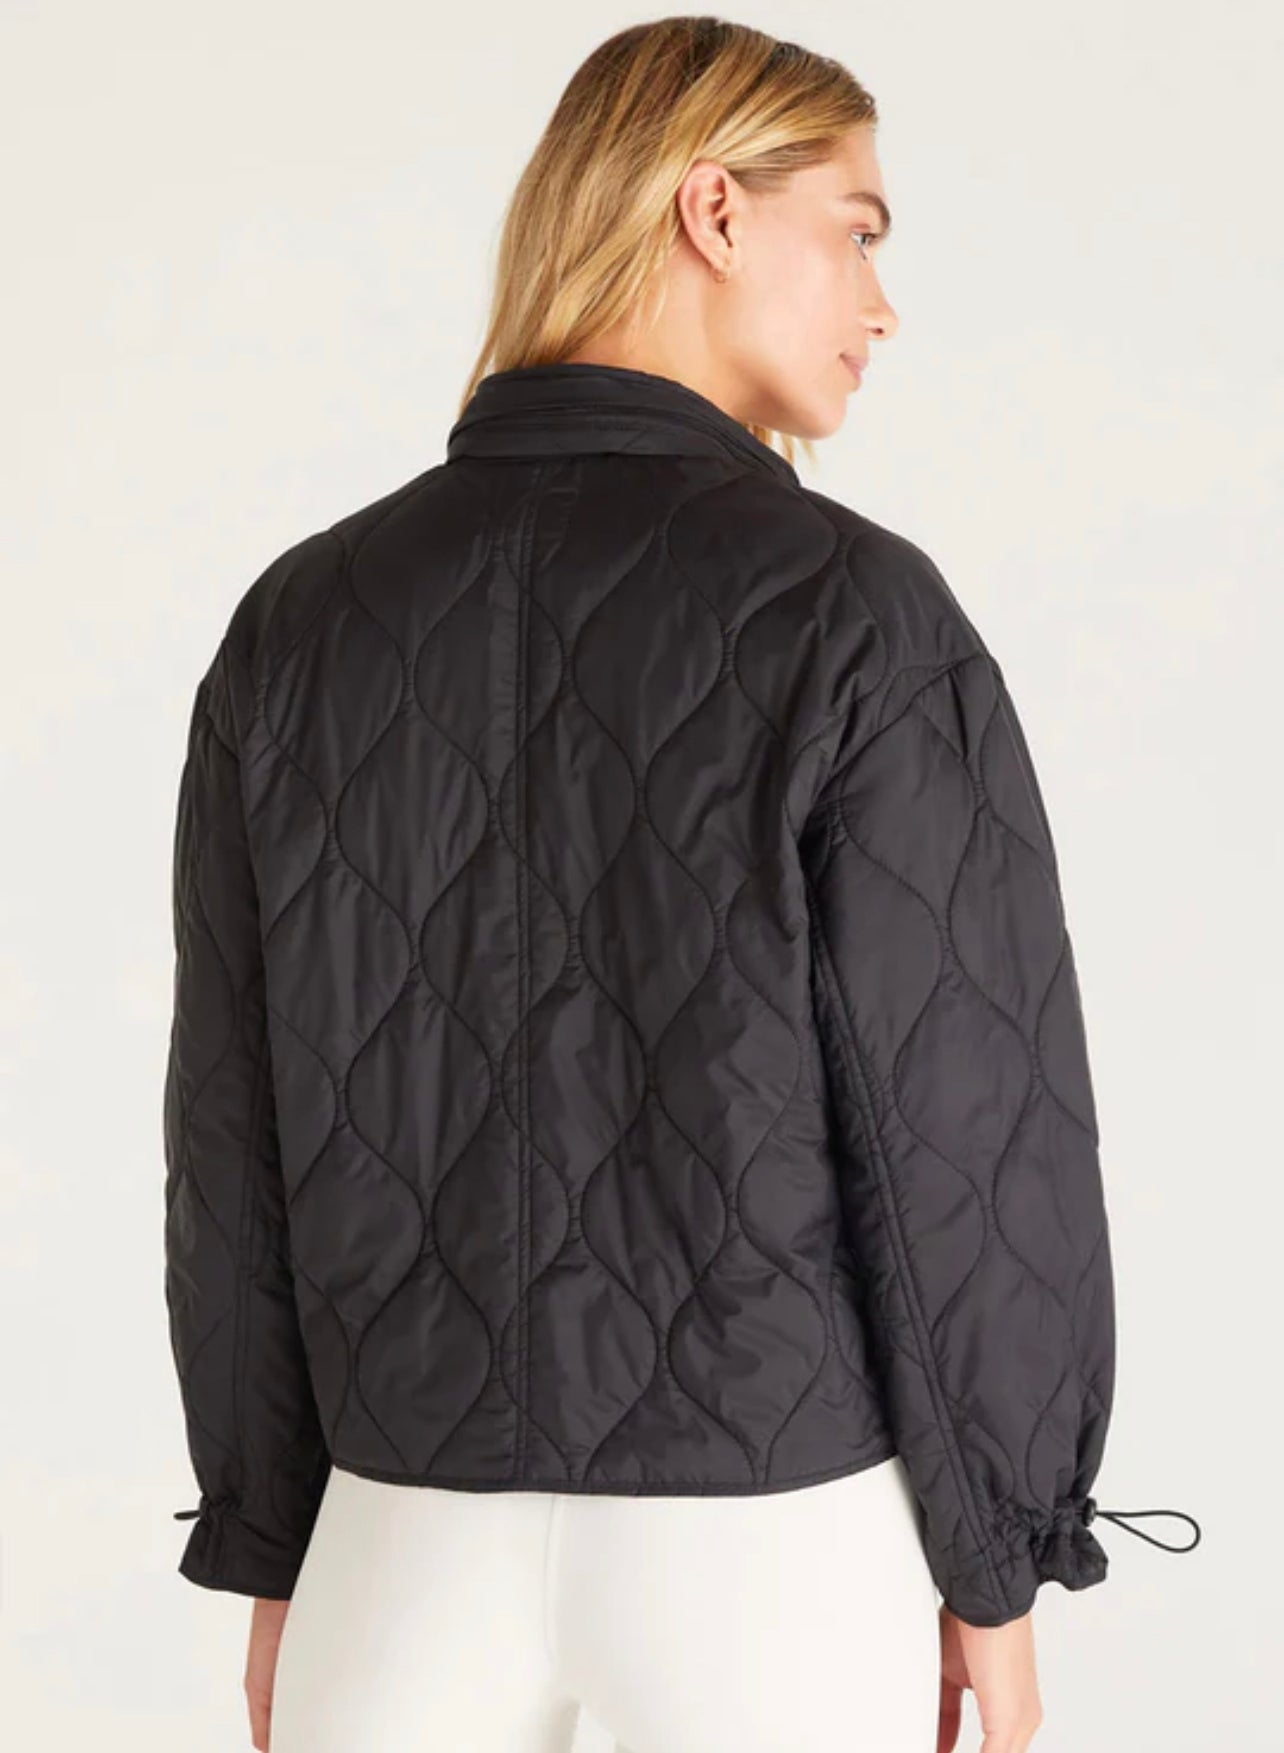 Z SUPPLY On-The-Go Reversible Jacket